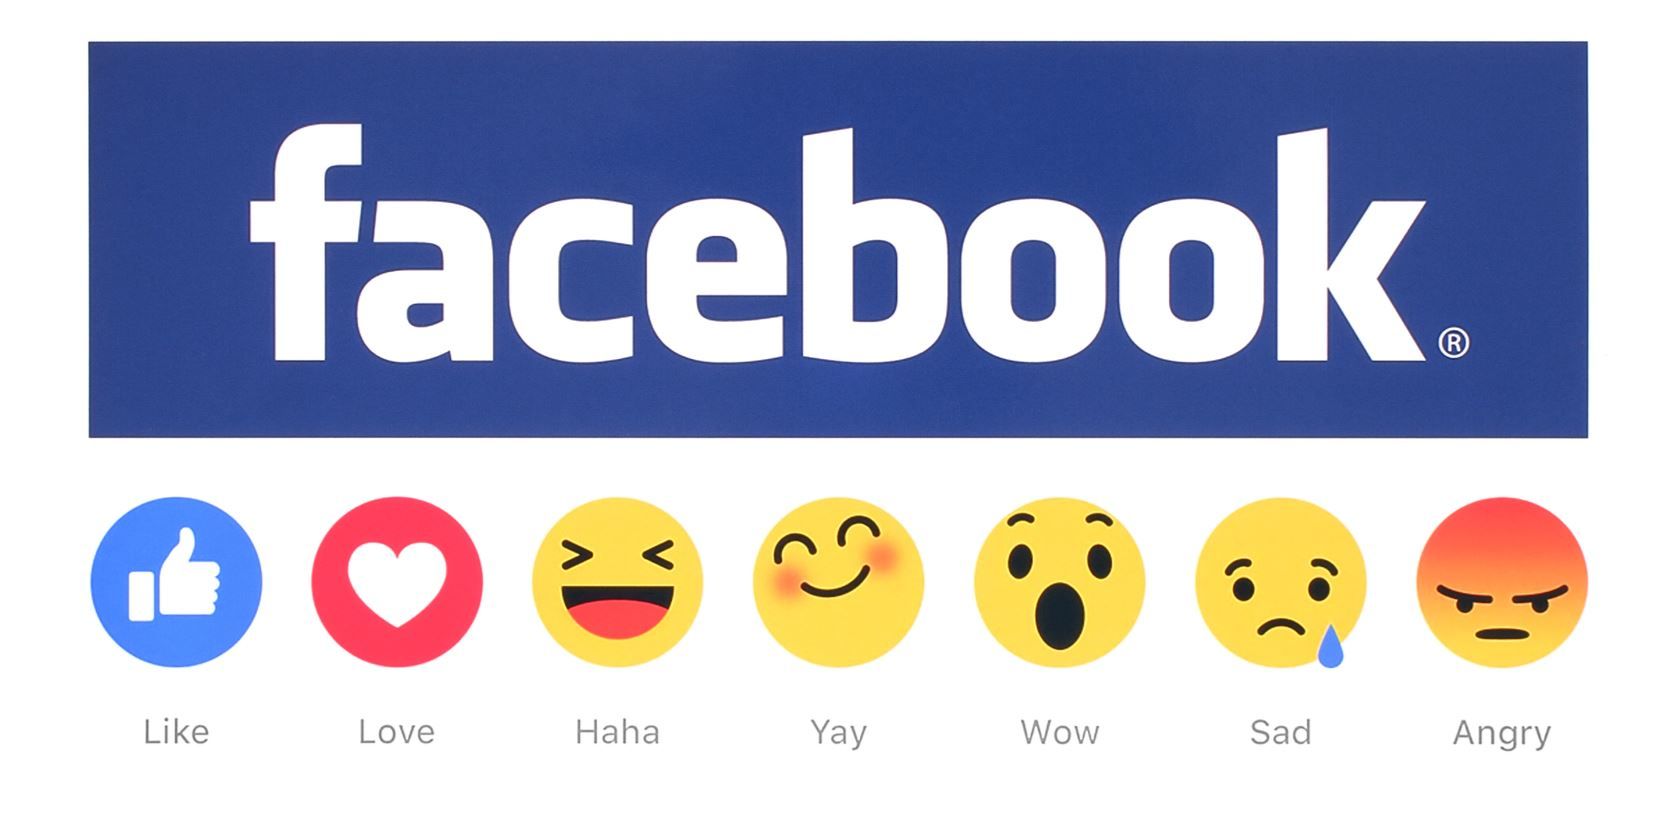 Facebook Symbols How To Use Them And What Are They